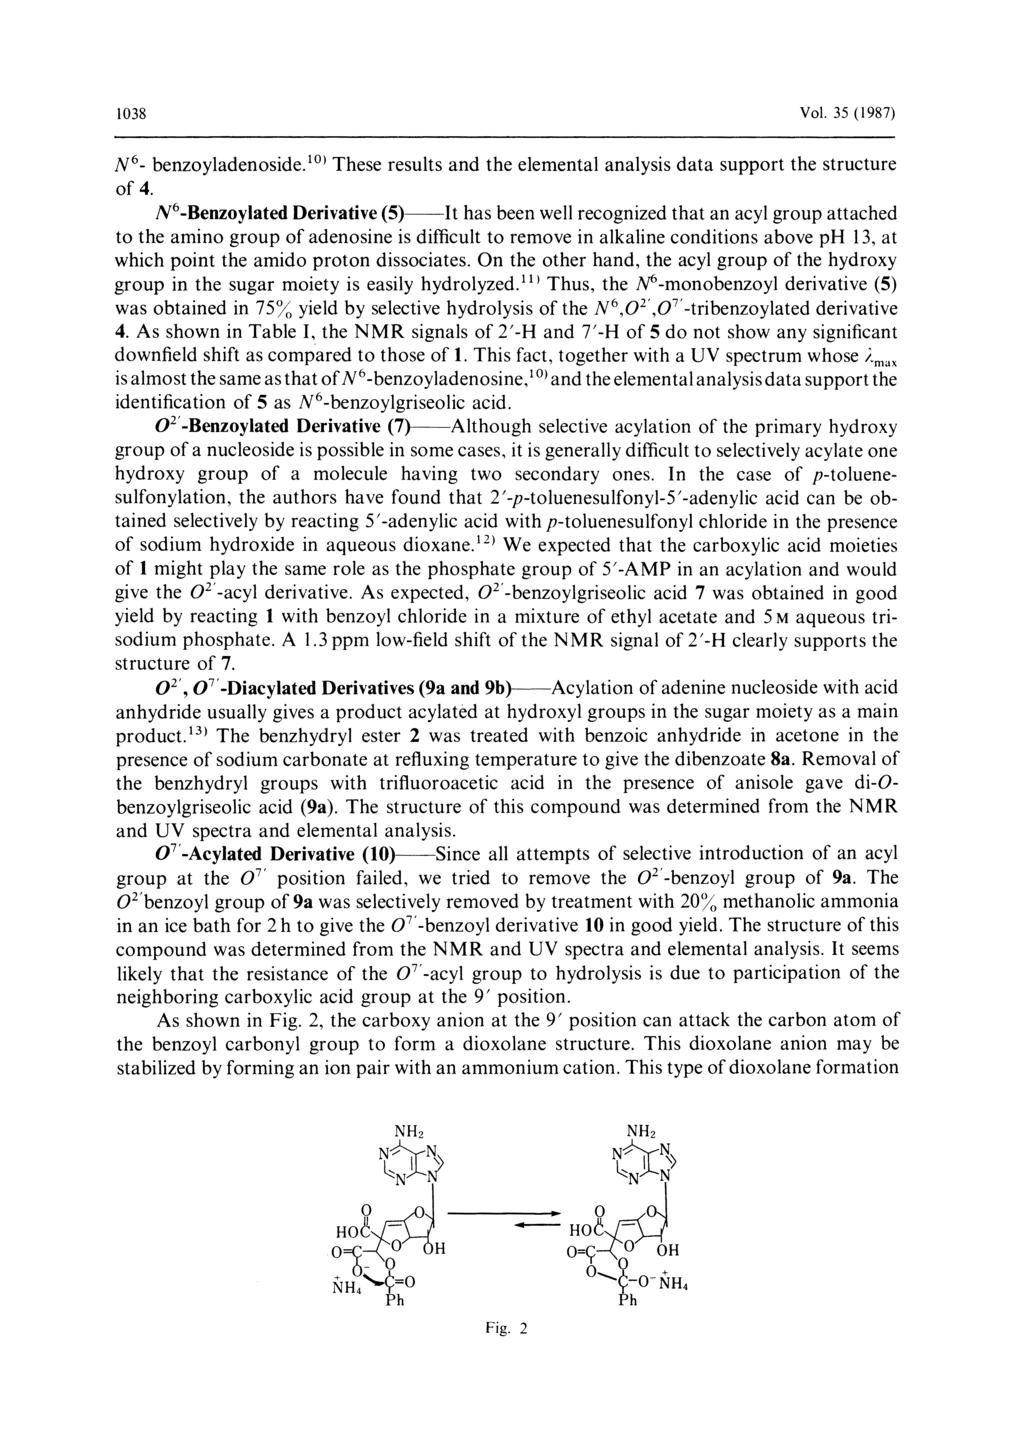 1038 Vol. 35 (1987) N6 - benzoyladenoside.10) These results and the elemental analysis data support the structure of 4.